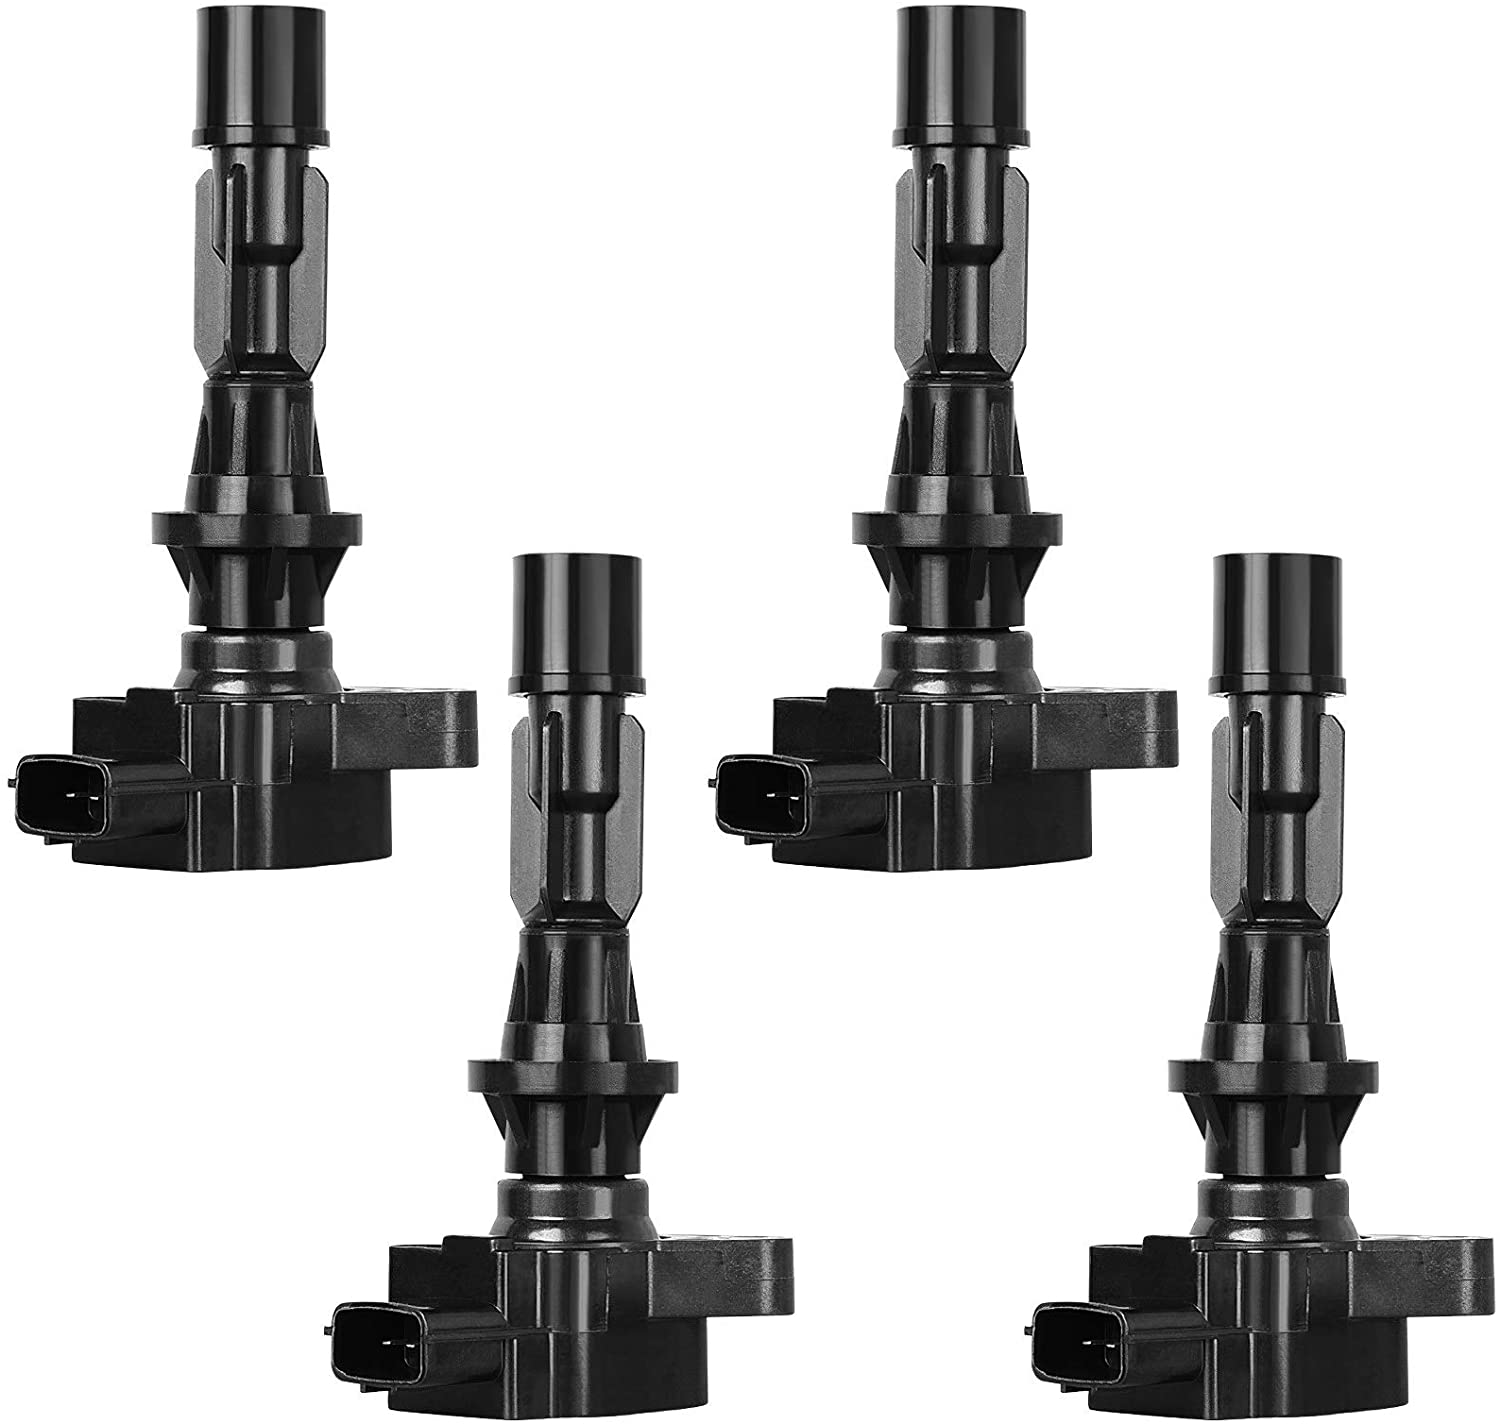 AUTOSAVER88 Ignition Coil Pack of 4 Compatible with 2006-2013 Mazda 3, 2006-2013 Mazda 6, 2007-2012 Mazda CX-7, 2006-2015 Mazda MX-5 Miata L4 2.0L 2.5L 2.3L